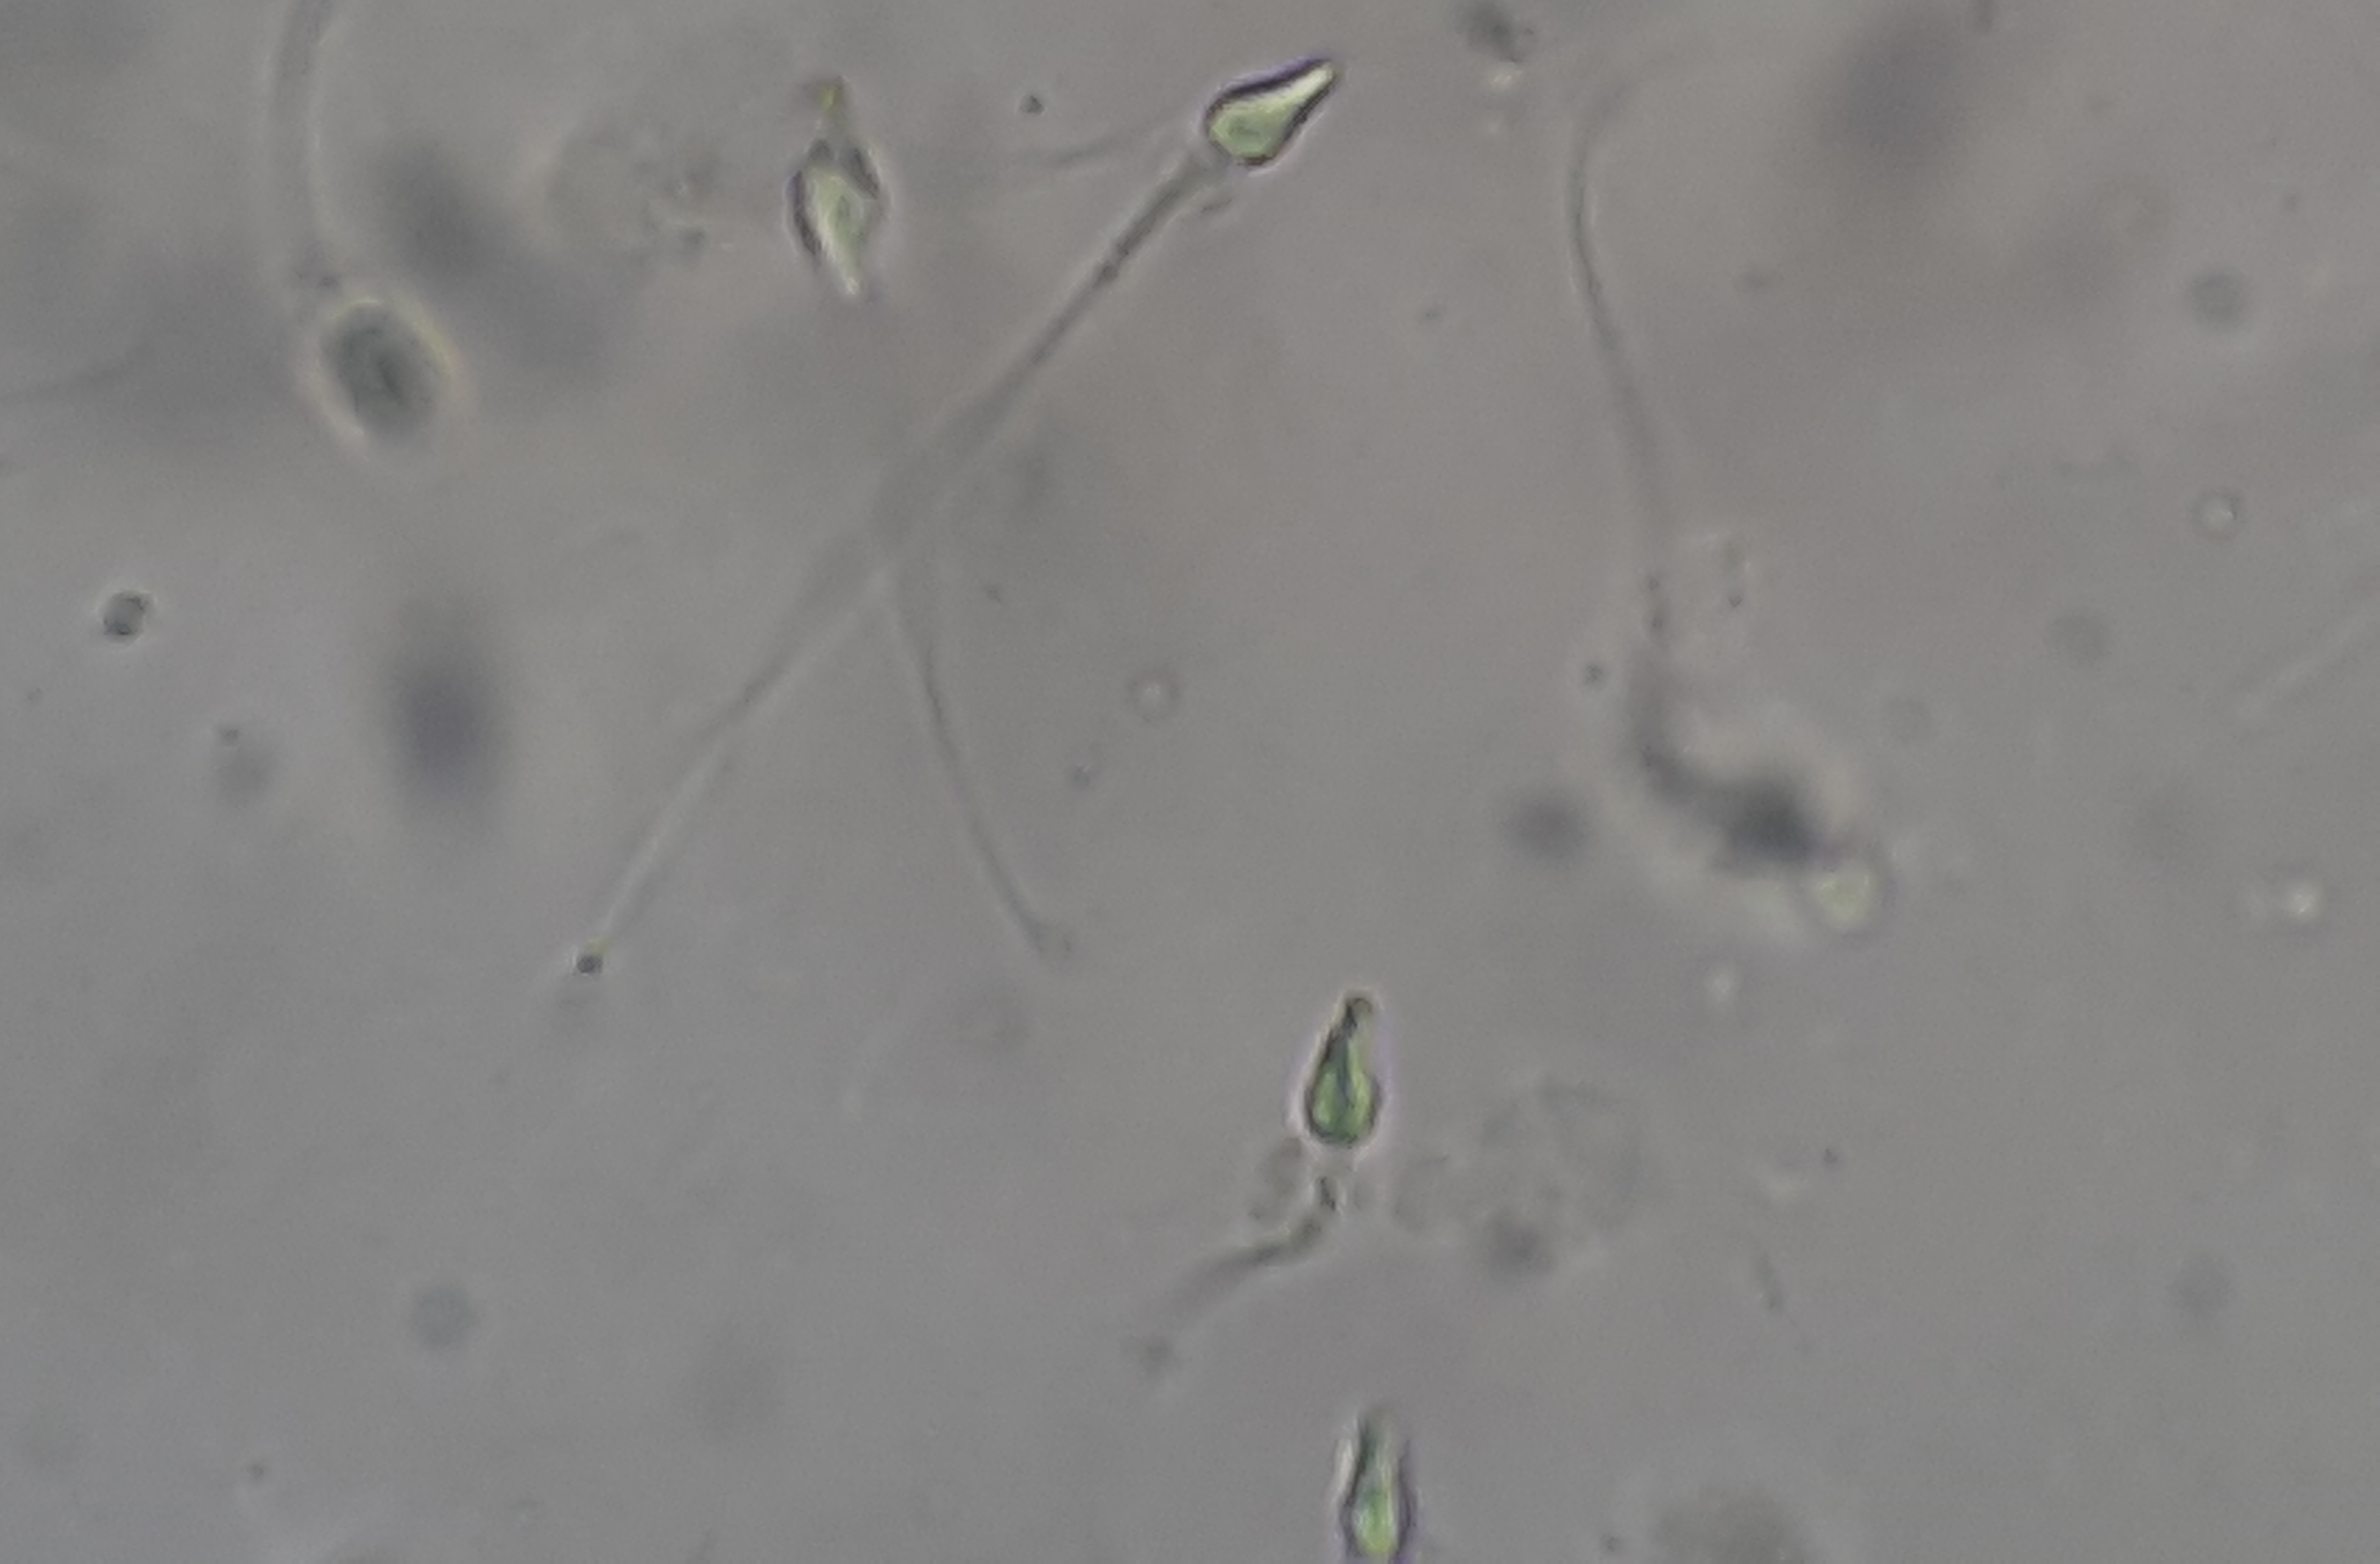 Laboratory assessment of sperm apoptosis ability in men with different fertility